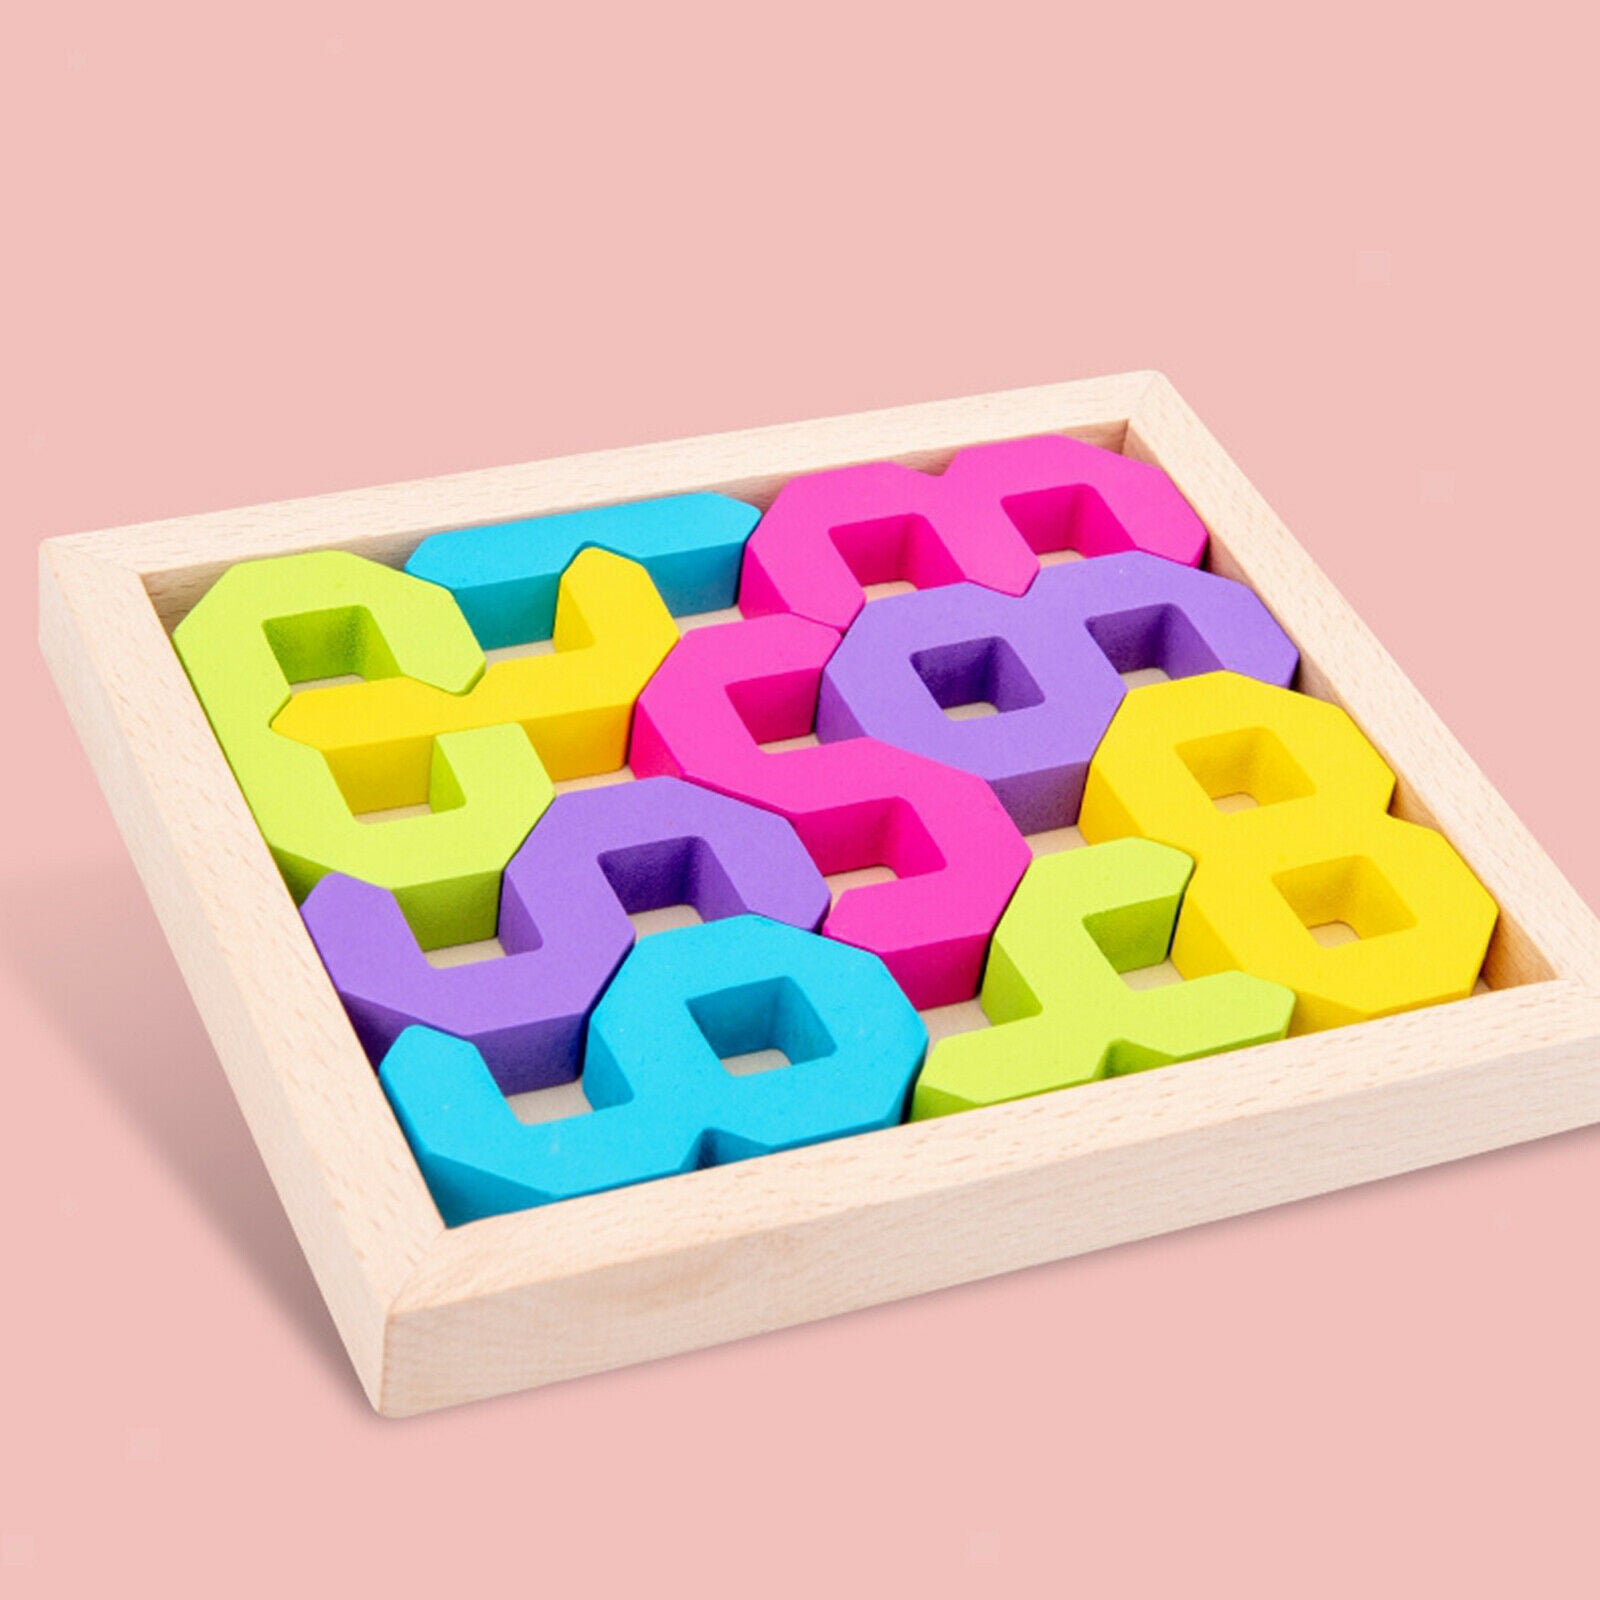 Wooden Puzzle Toys Number Block Digital Learning for 1-3 Years Old Kids